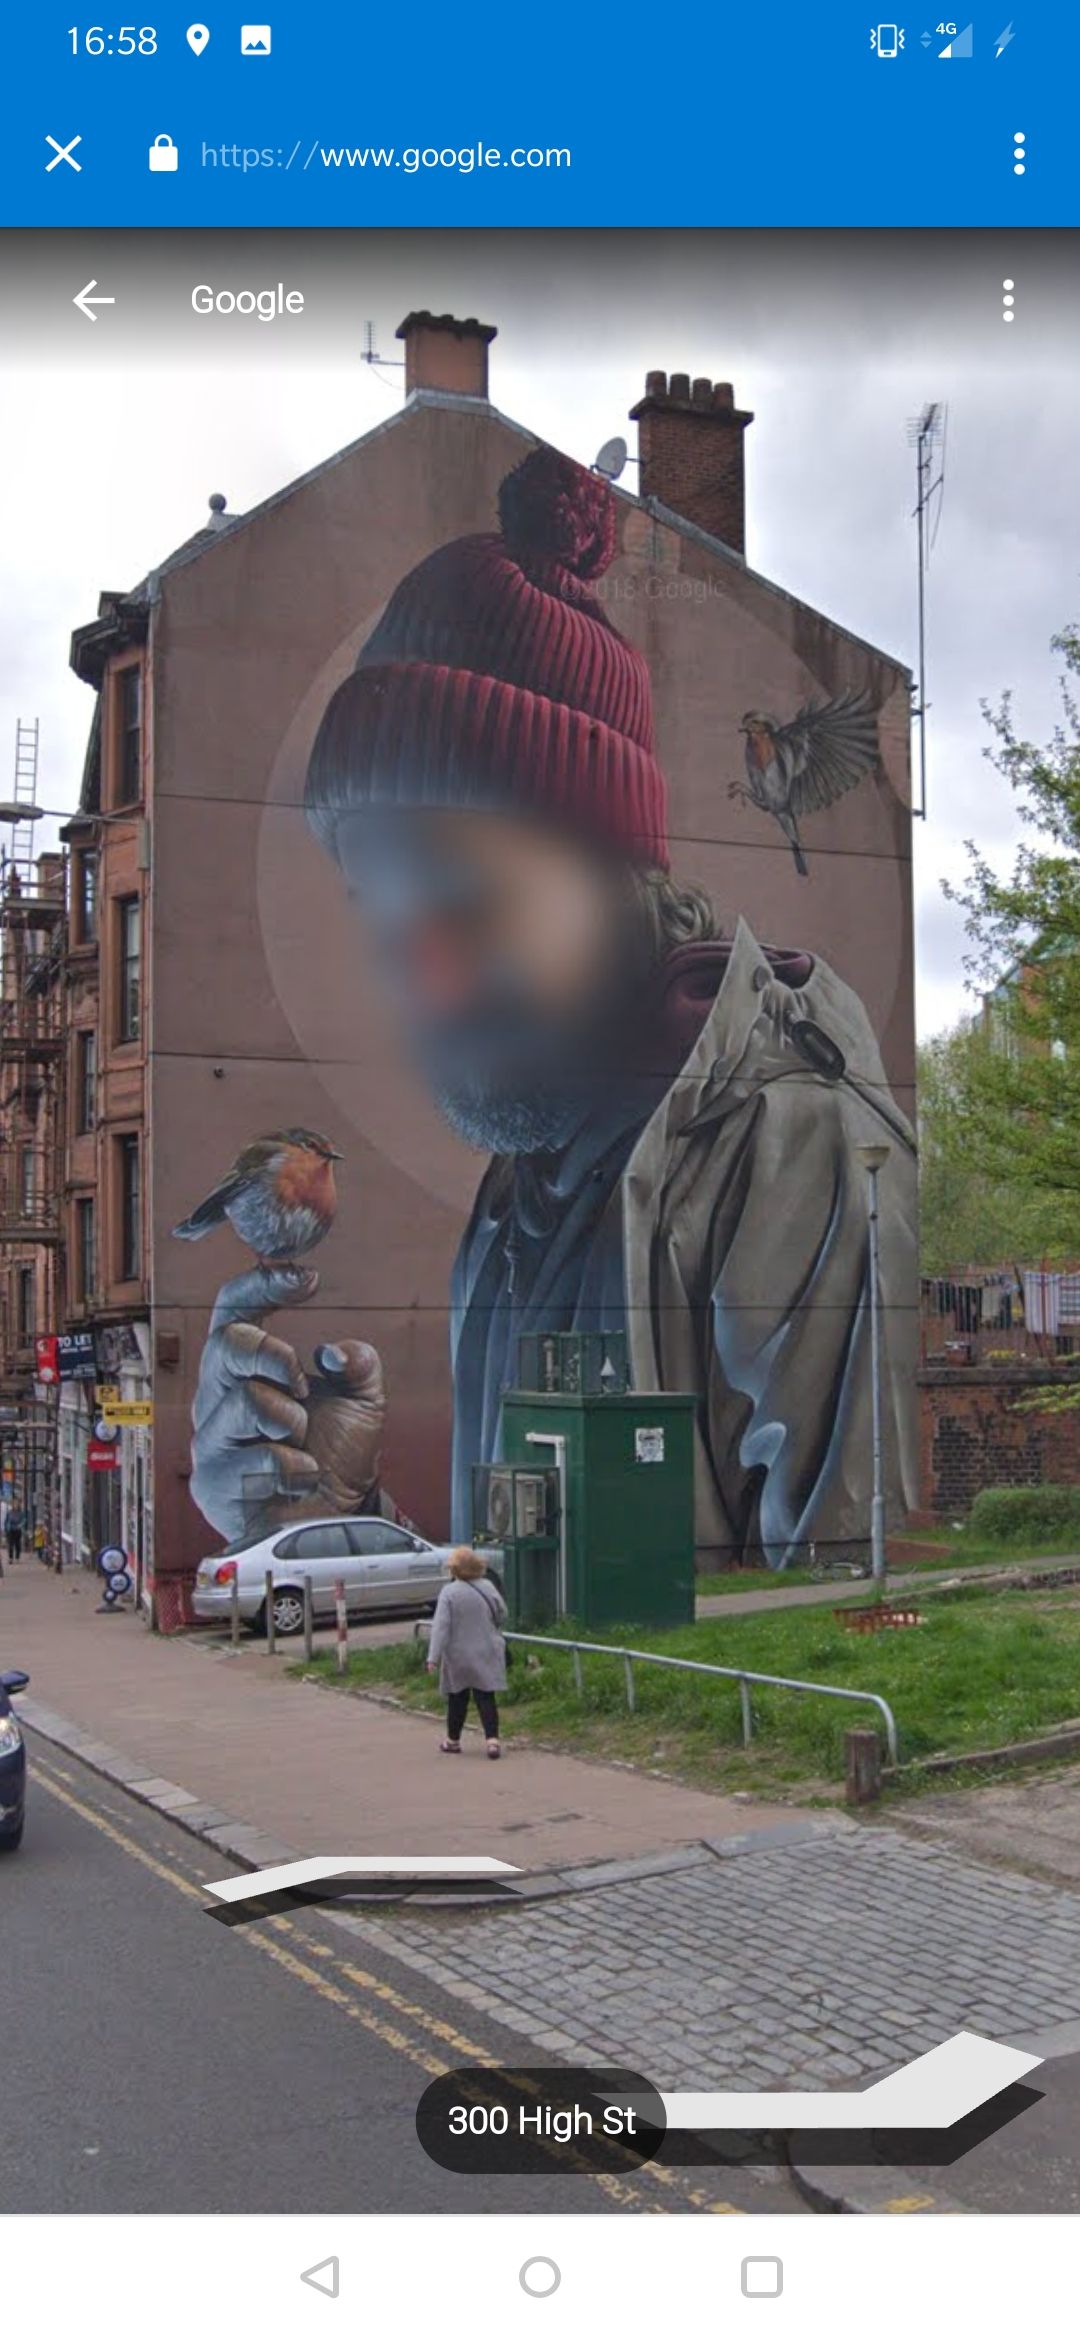 Google respect privacy so much that they will blur out a man's face on some street art, but happily sell your data to advertisers